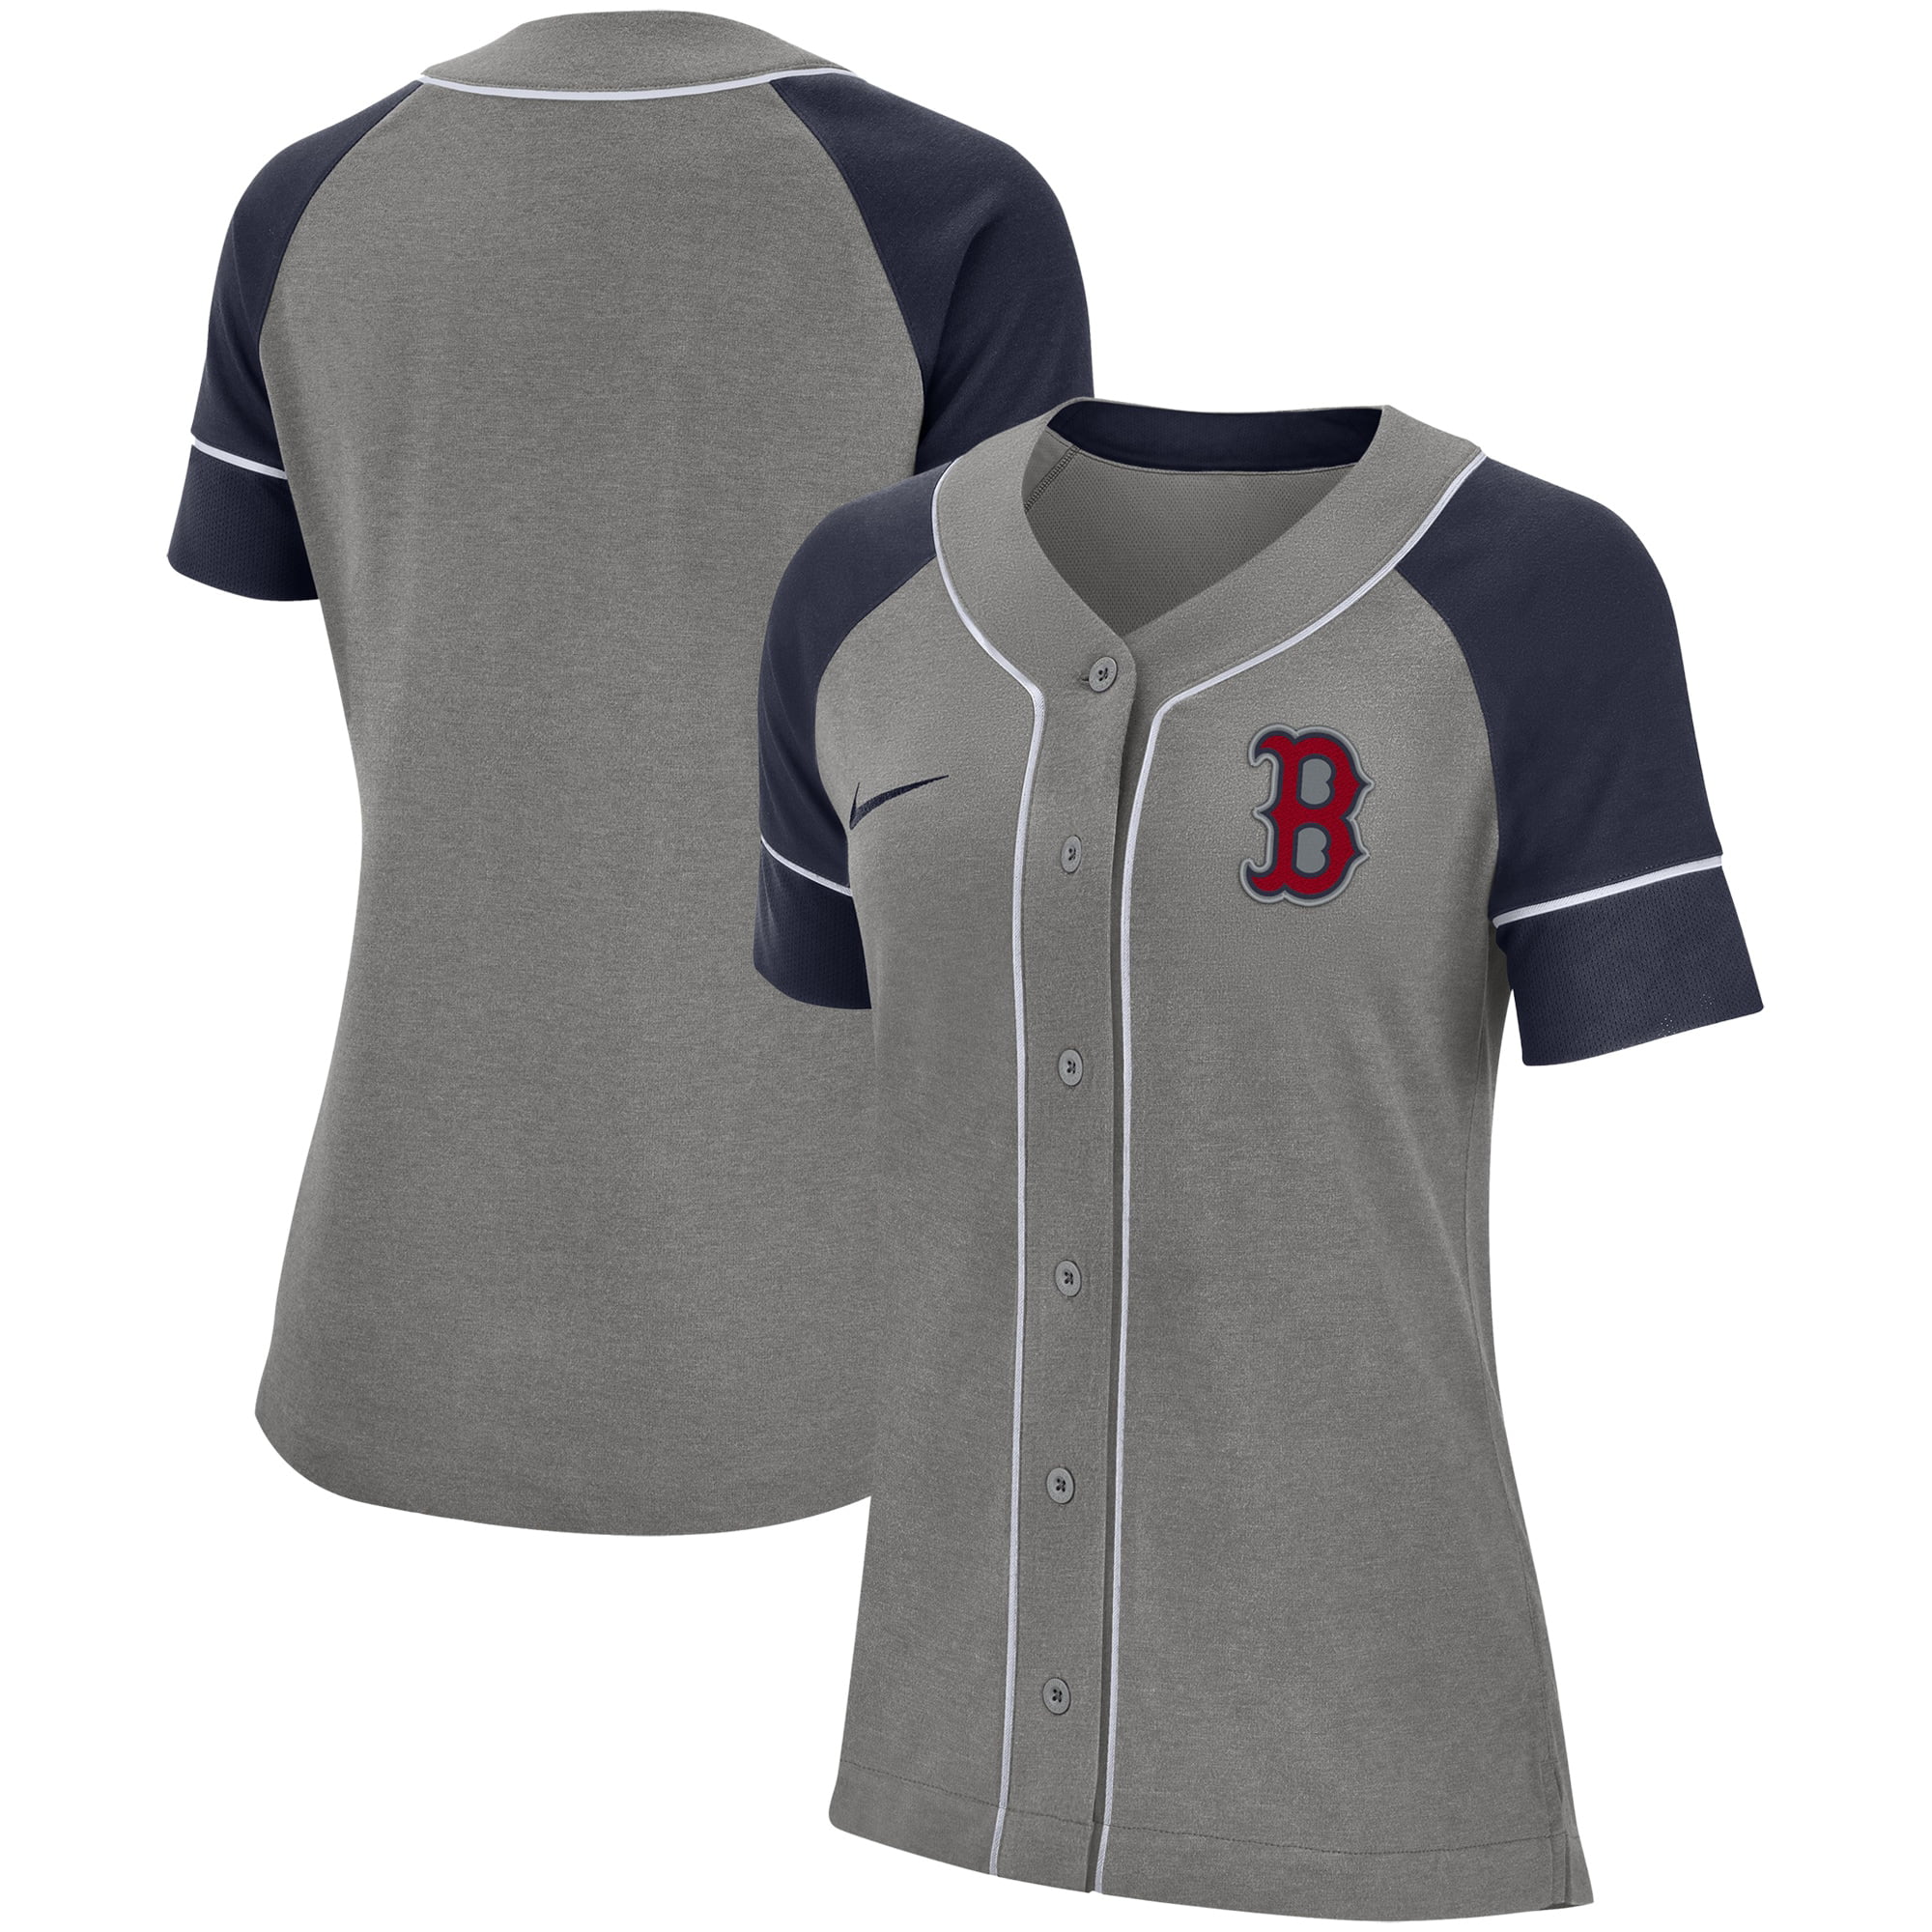 red sox grey jersey